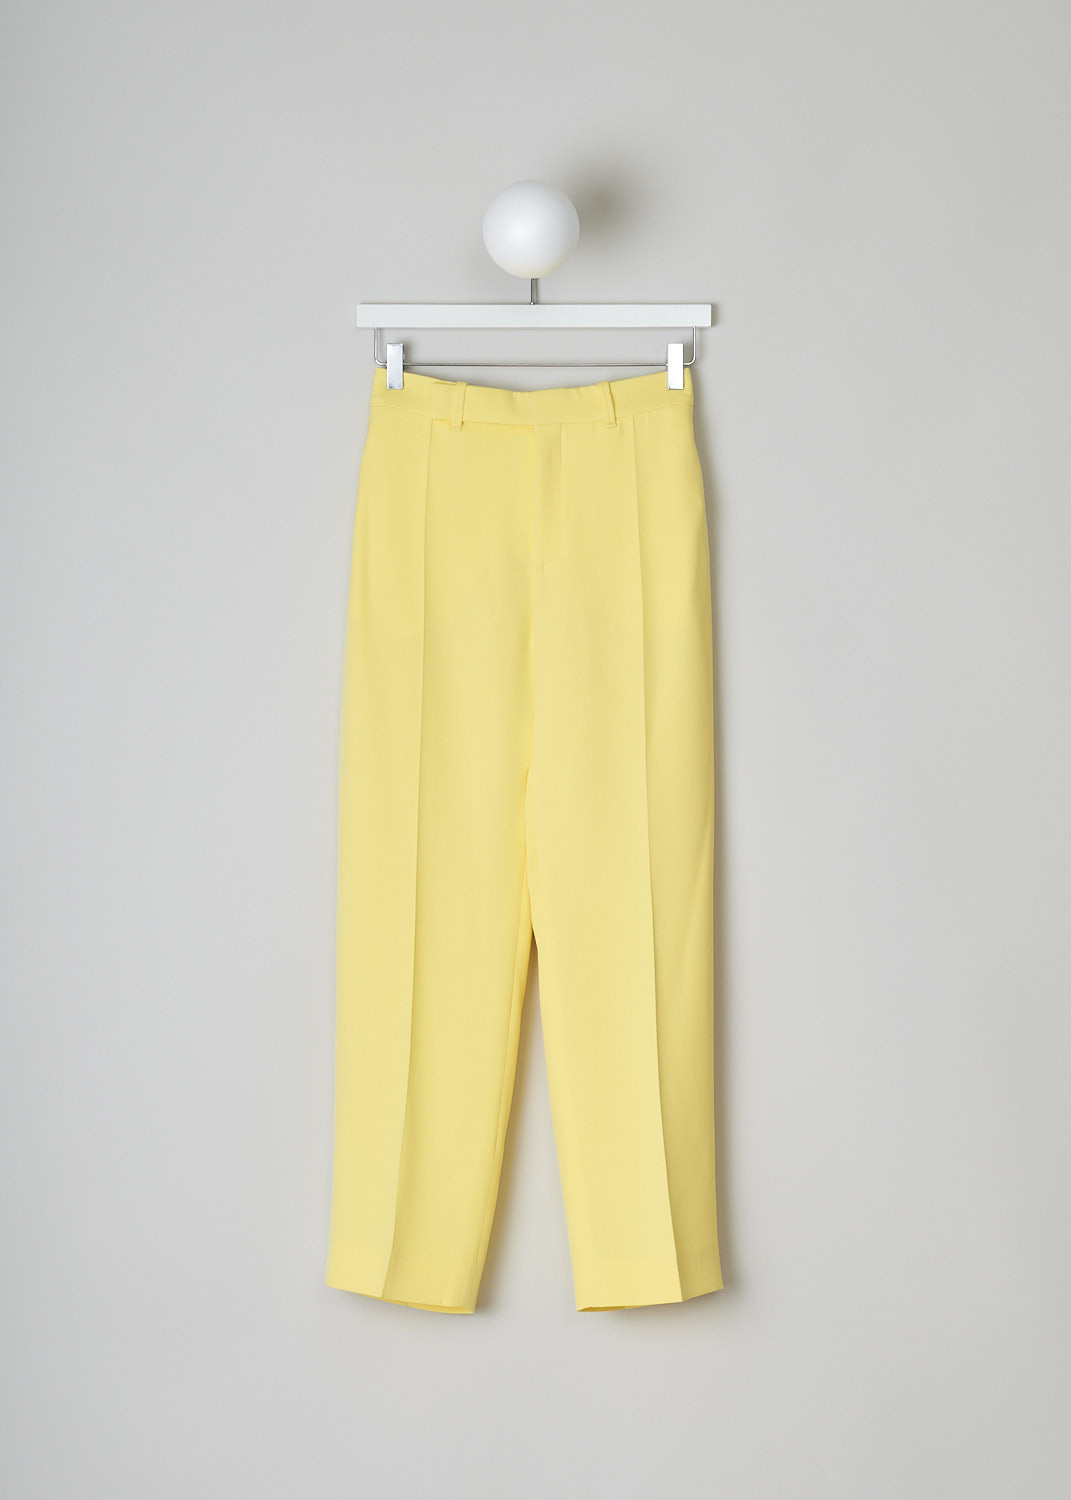 CHLOÉ, RADIANT YELLOW CLASSIC SILK PANTS, CHC22UPA12015757_RADIANT_YELLOW, Yellow, Front, These radiant yellow high-waisted pants have a waistband with belt loops and a concealed front zip and clasp closure. These pants have straight, cropped pant legs with pressed centre creases with slanted pockets in the front and welt pockets in the back.
